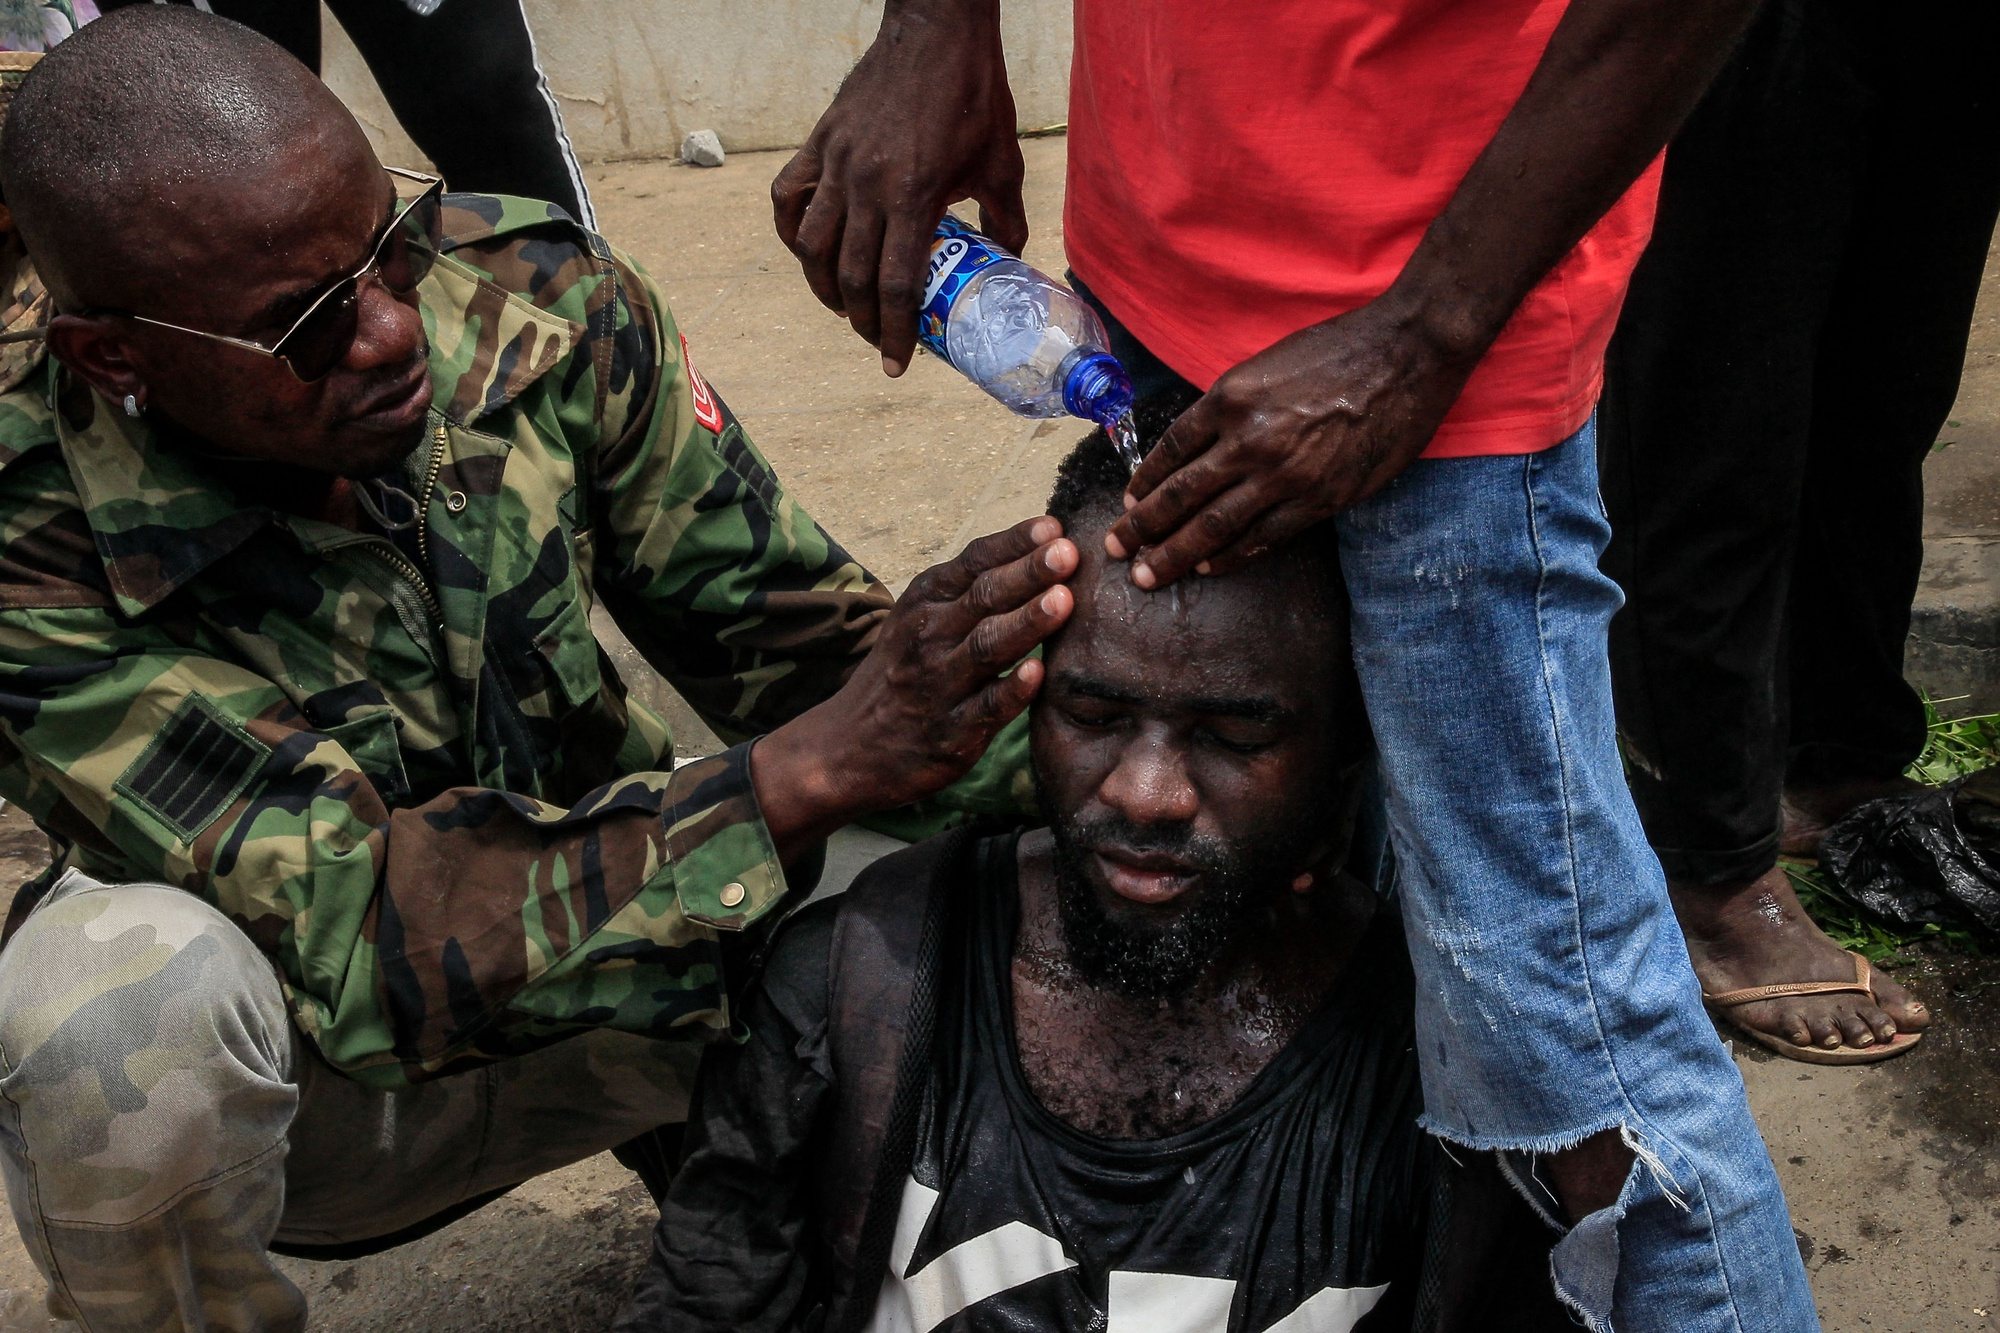 People help an injured man after the police used tear gas to disperse a riot in the surroundings of the city&#039;s Santa Ana cemetery, where the kuduro musician known as &#039;Nagrelha&#039; was to be buried, near Luanda, Angola, 22 November 2022. Gelson Caio Manuel Mendes, better known as &#039;Nagrelha&#039;, the most famous singer in the kuduro musical style, died in Luanda, of lung cancer, according to the Complexo Hospitalar de Doenças Cardiovasculares Dom Alexandre do Nascimento, where he was being cared for. He was 36. AMPE ROGERIO/LUSA